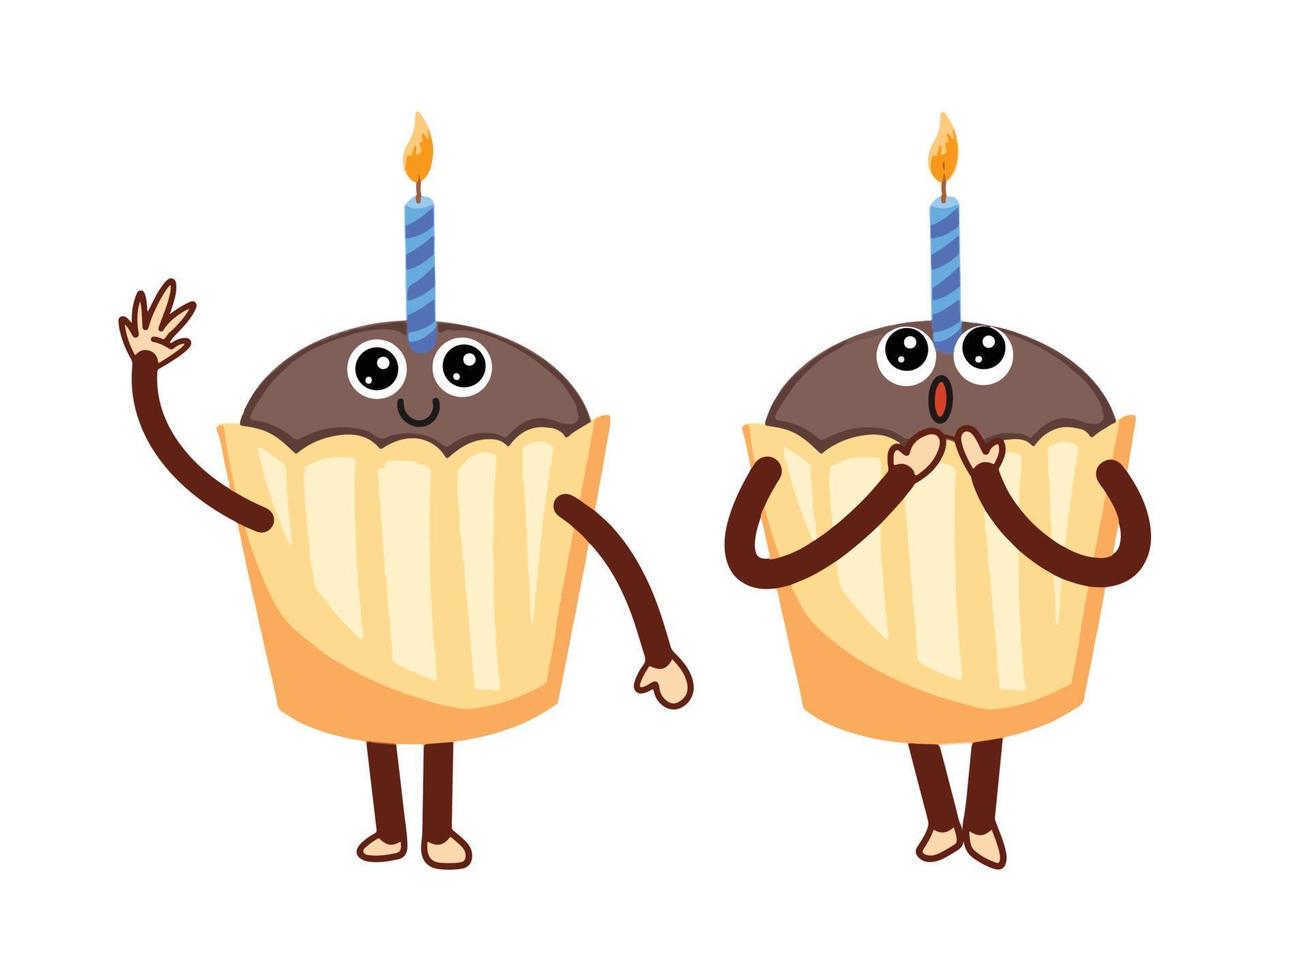 Cupcake chocolate flavored vector character mascot with facial expression and hand gesture isolated on plain white background. Cute sweet food drawing with simple flat art style.